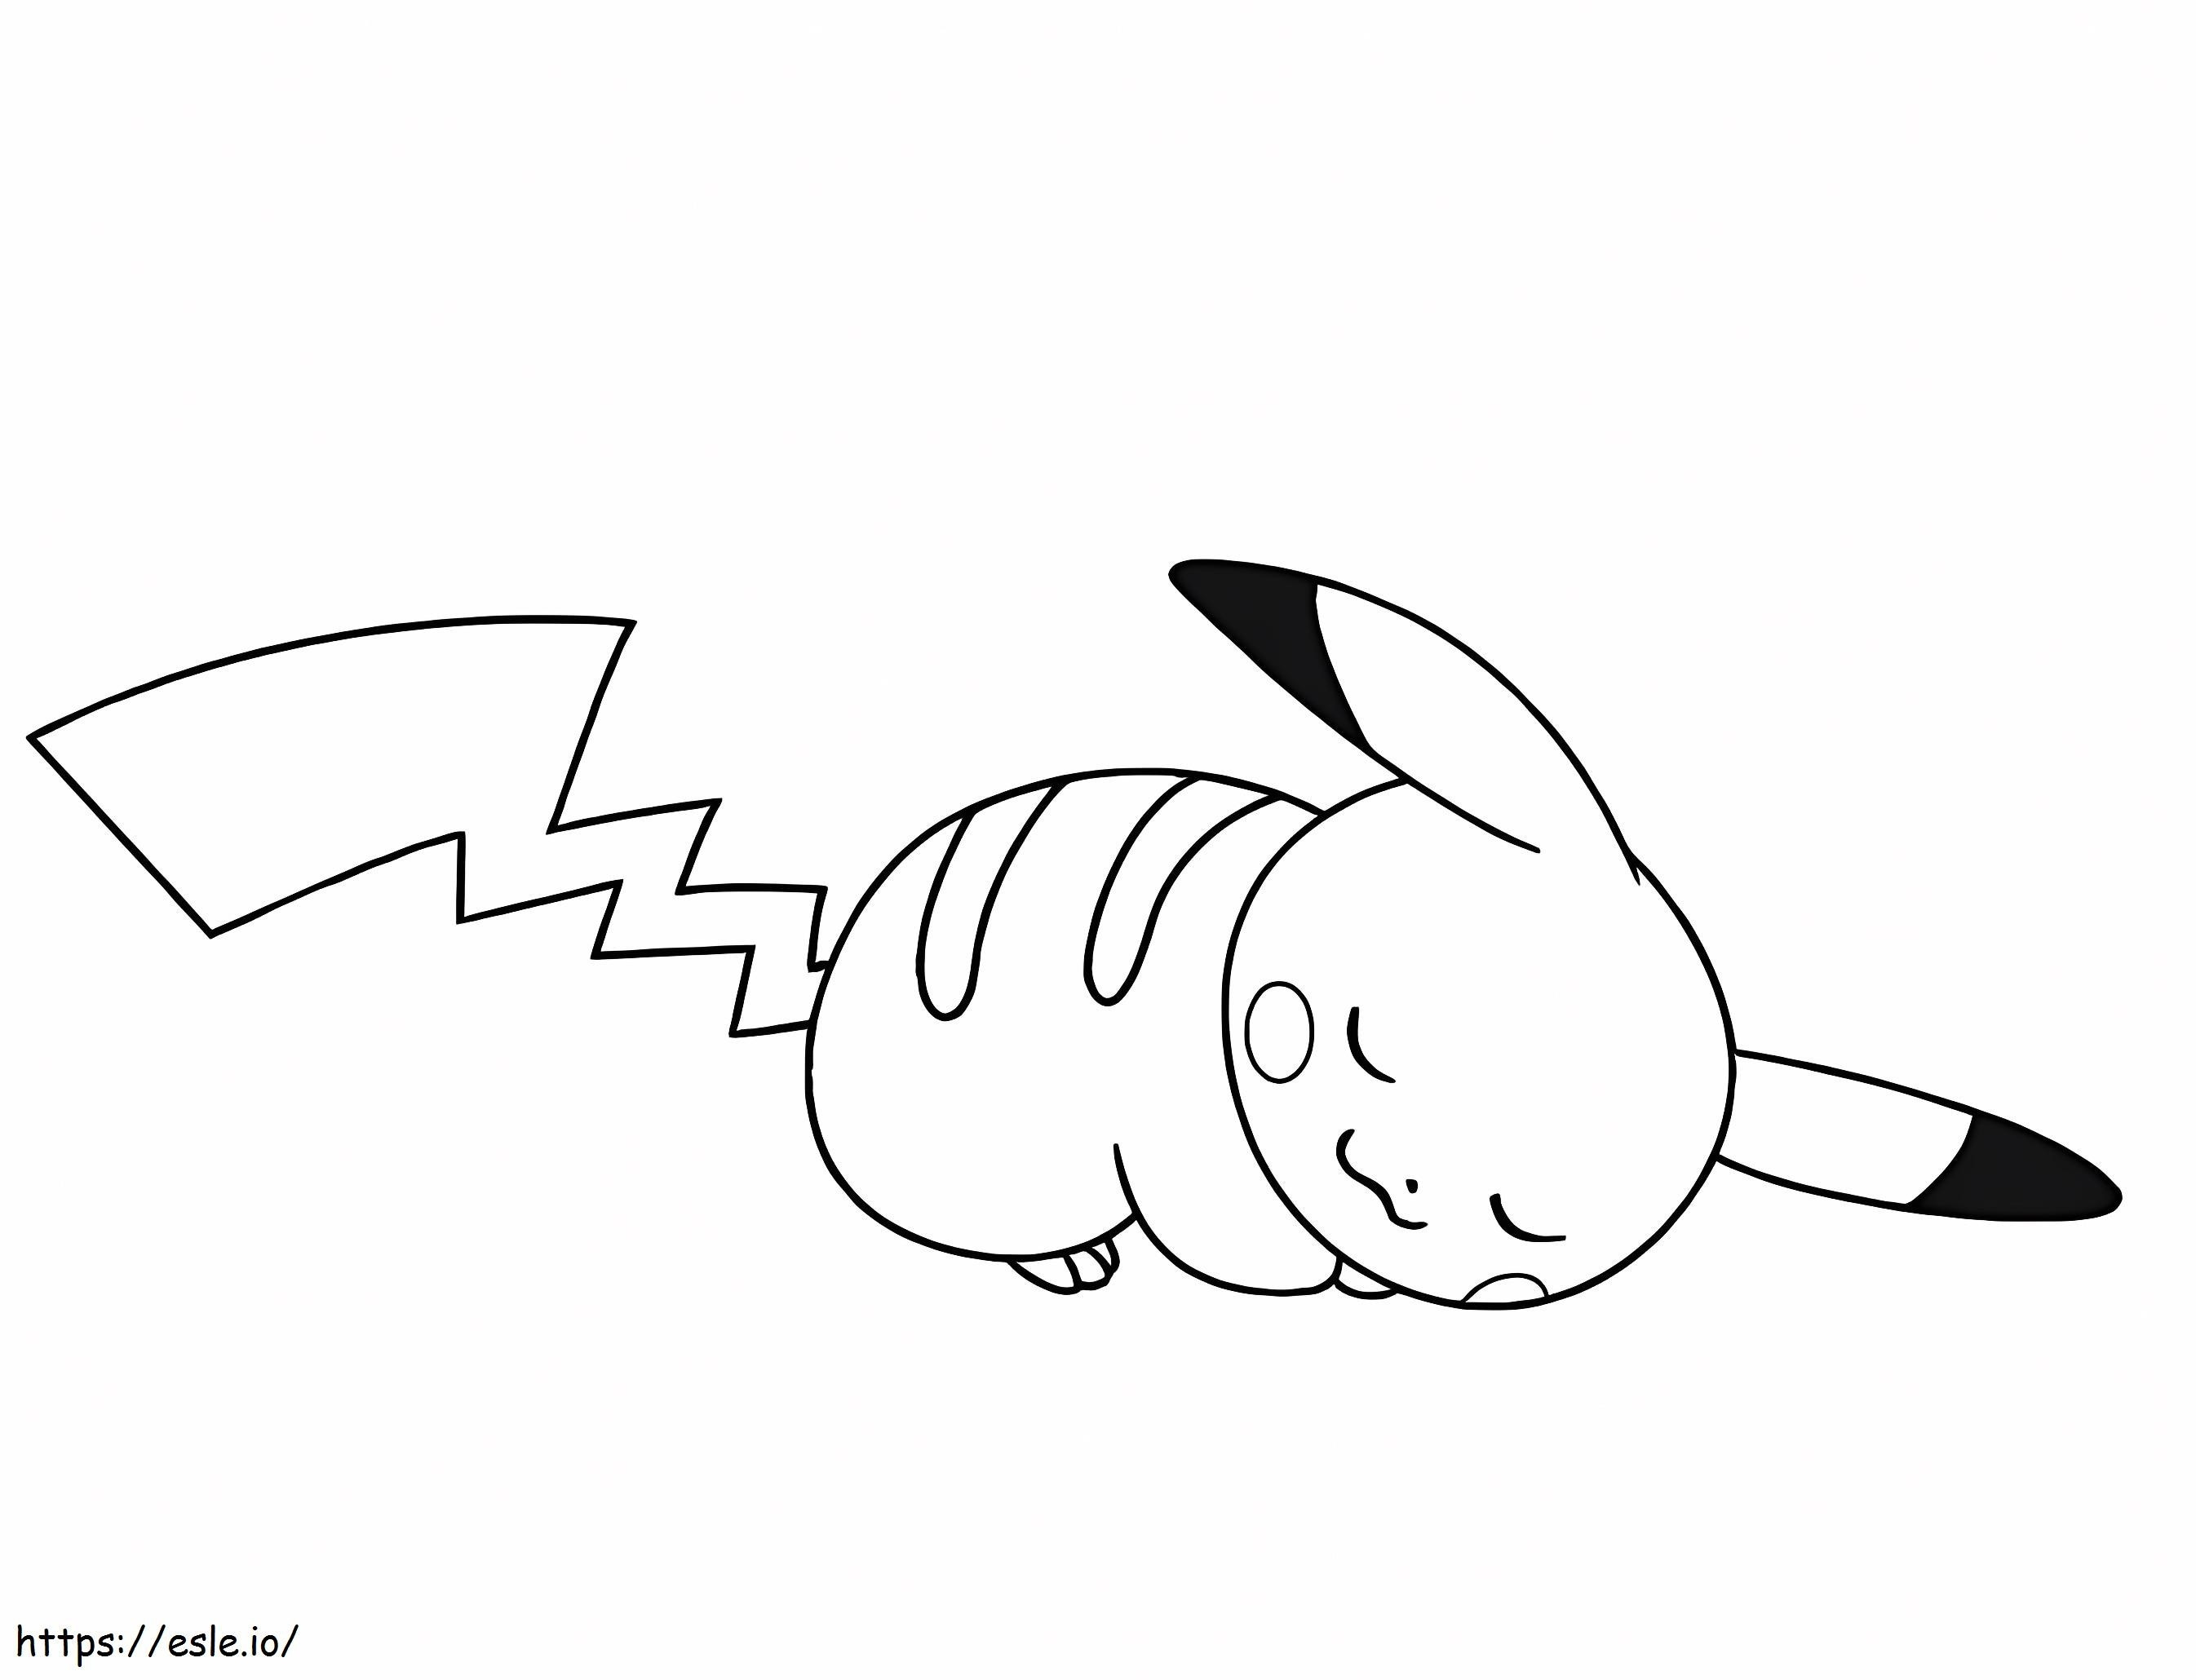 Pikachu Who Dort coloring page